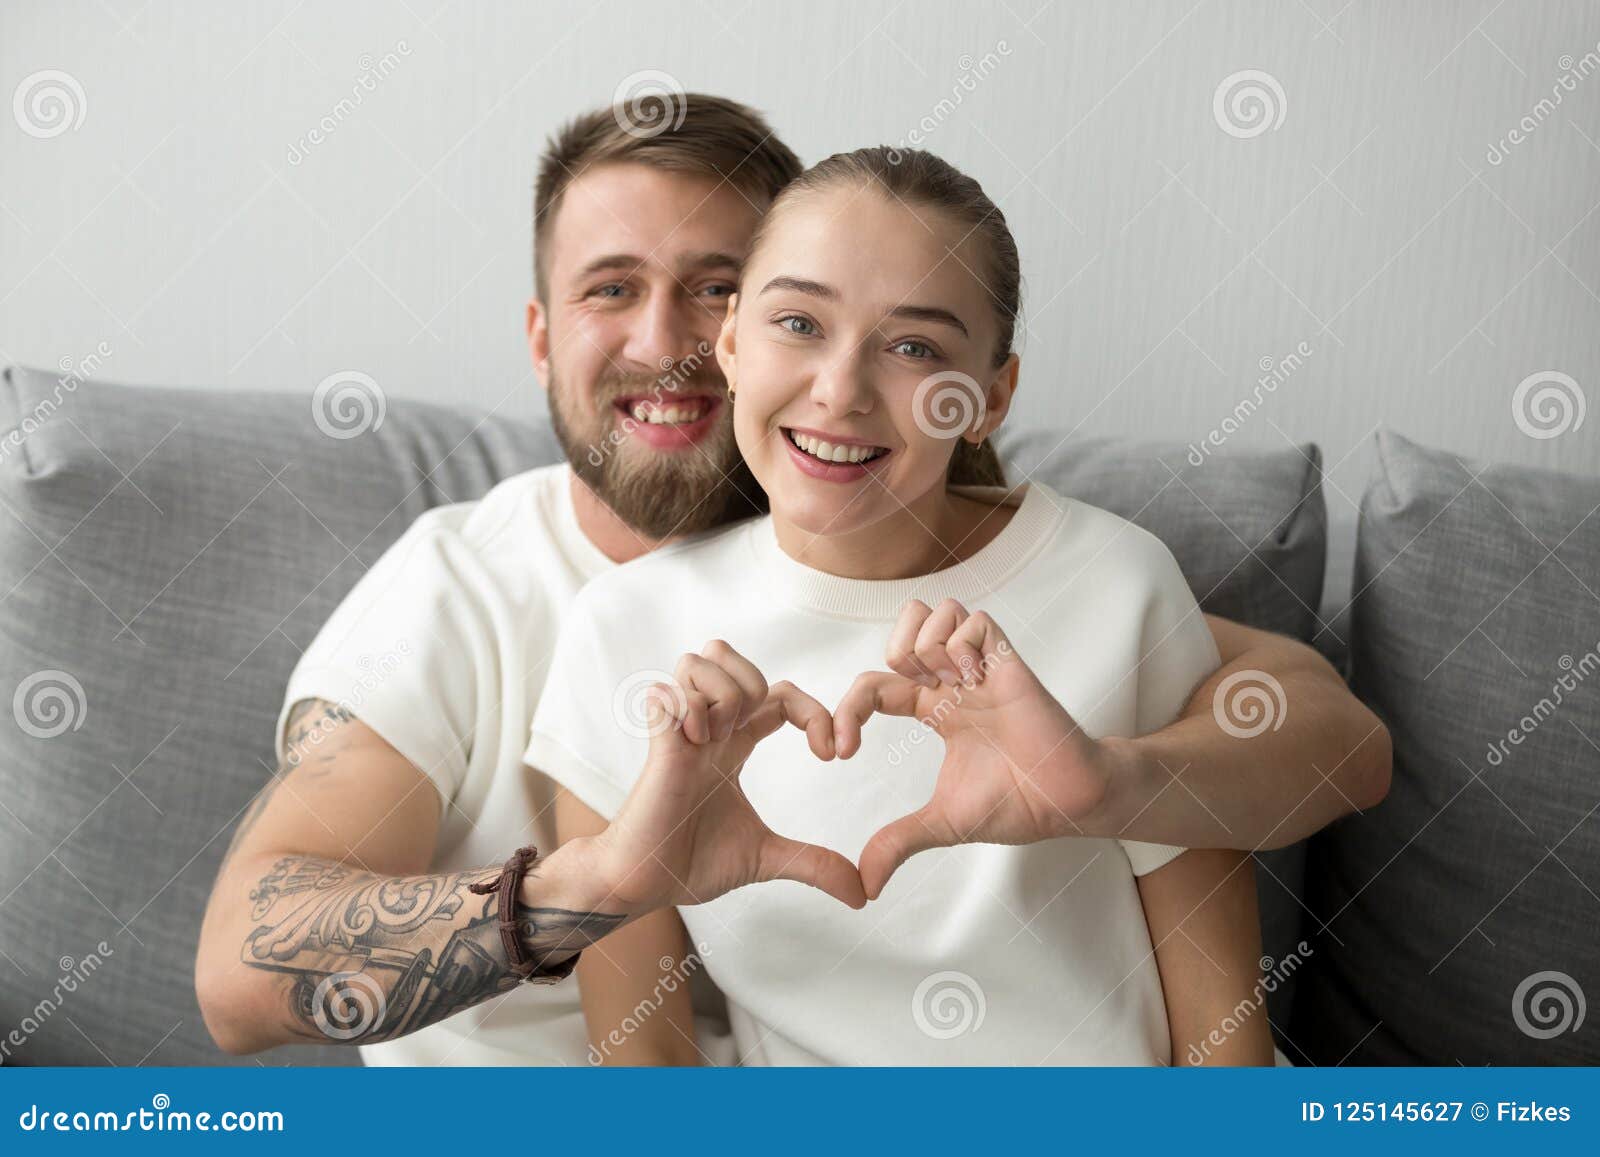 Side view of tender couple hugging and bonding with closed eyes in cold day  in mountains — people, sightseeing - Stock Photo | #328257096